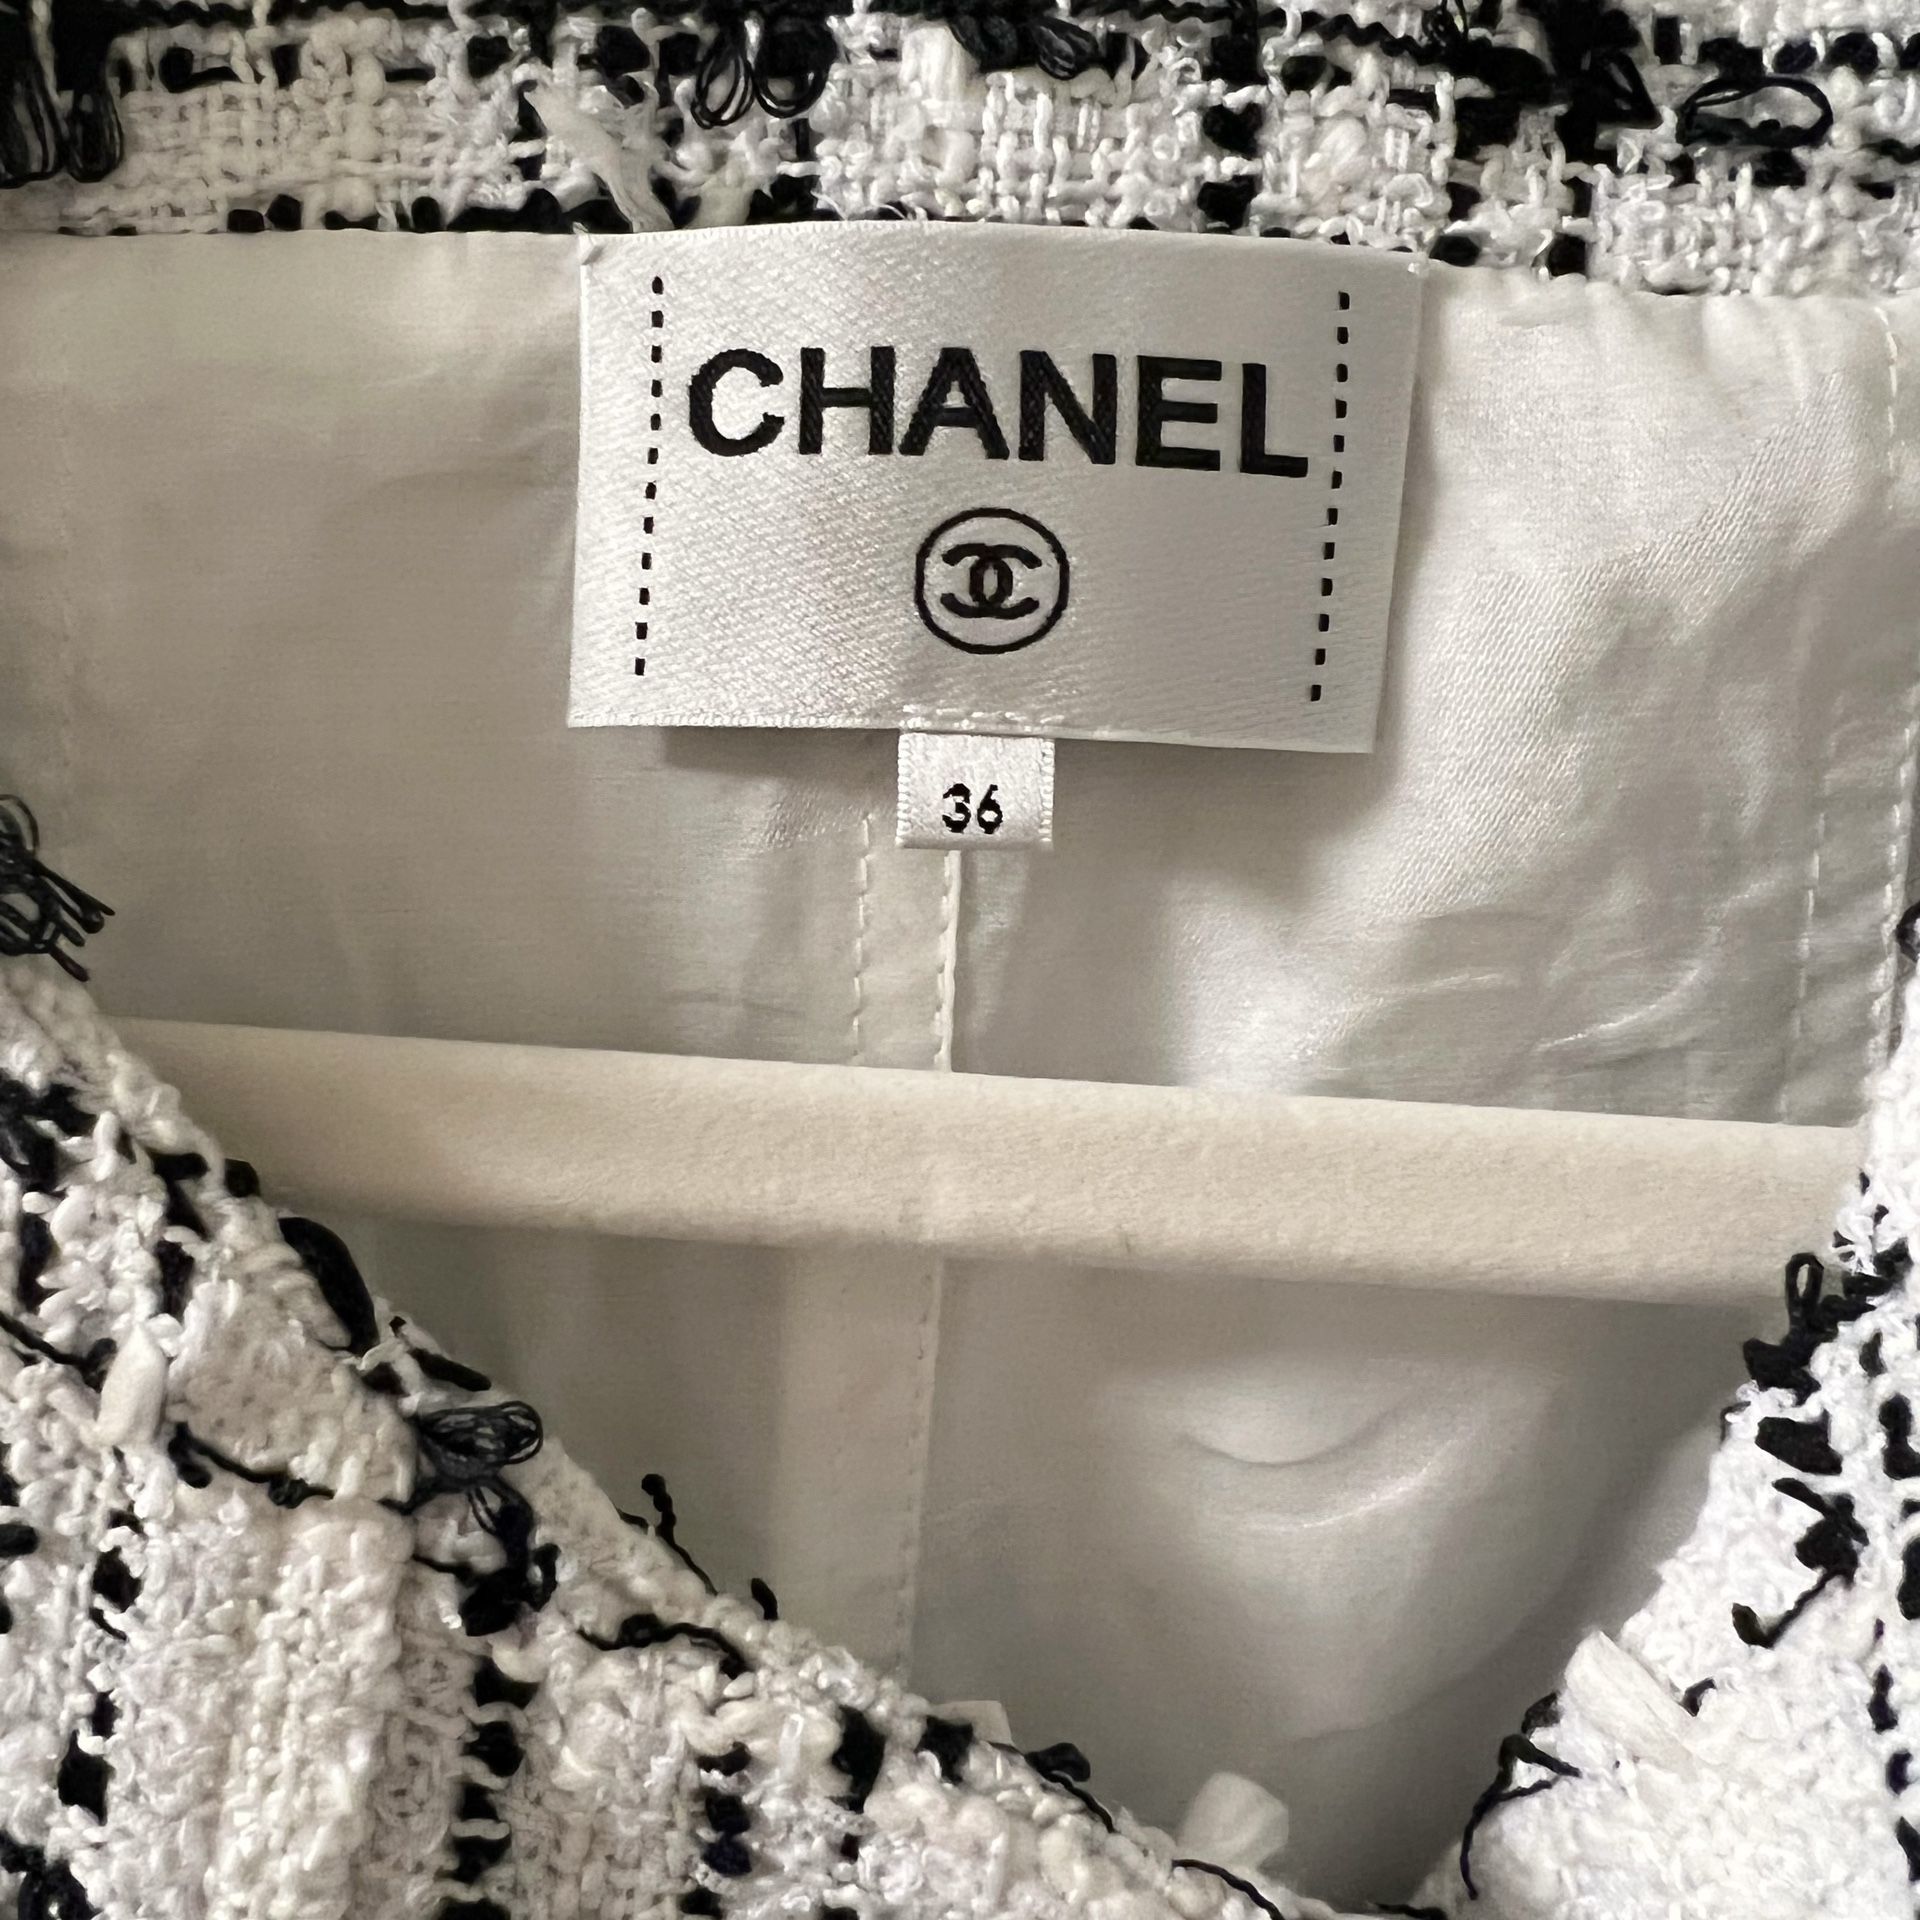 Chanel cotton tweed White-black jacket FR36 for Sale in West 